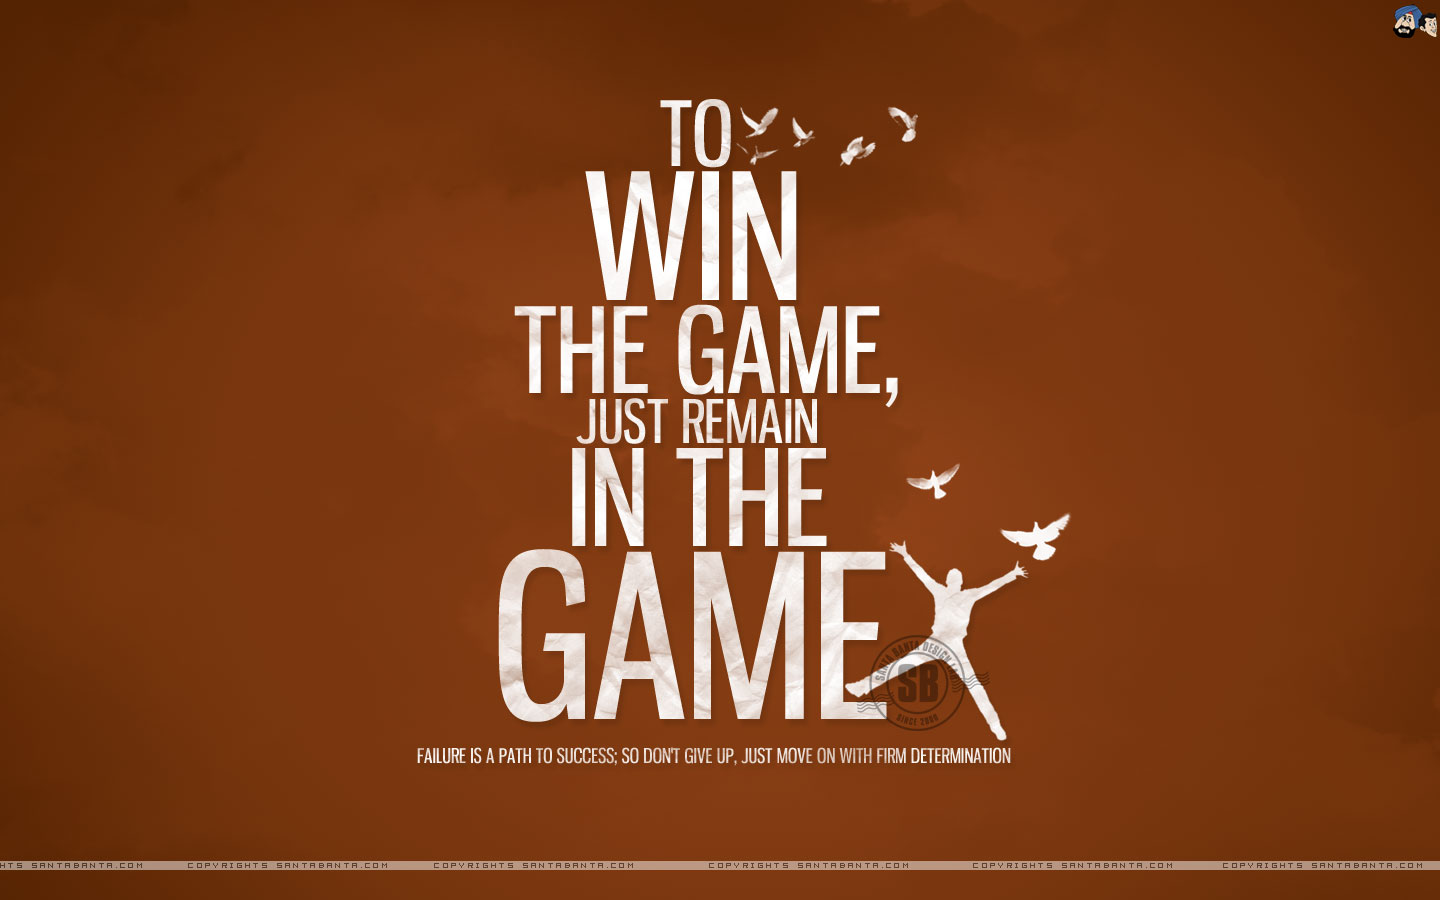 Motivational Wallpaper On Winning To Win The Game Dont Give Up